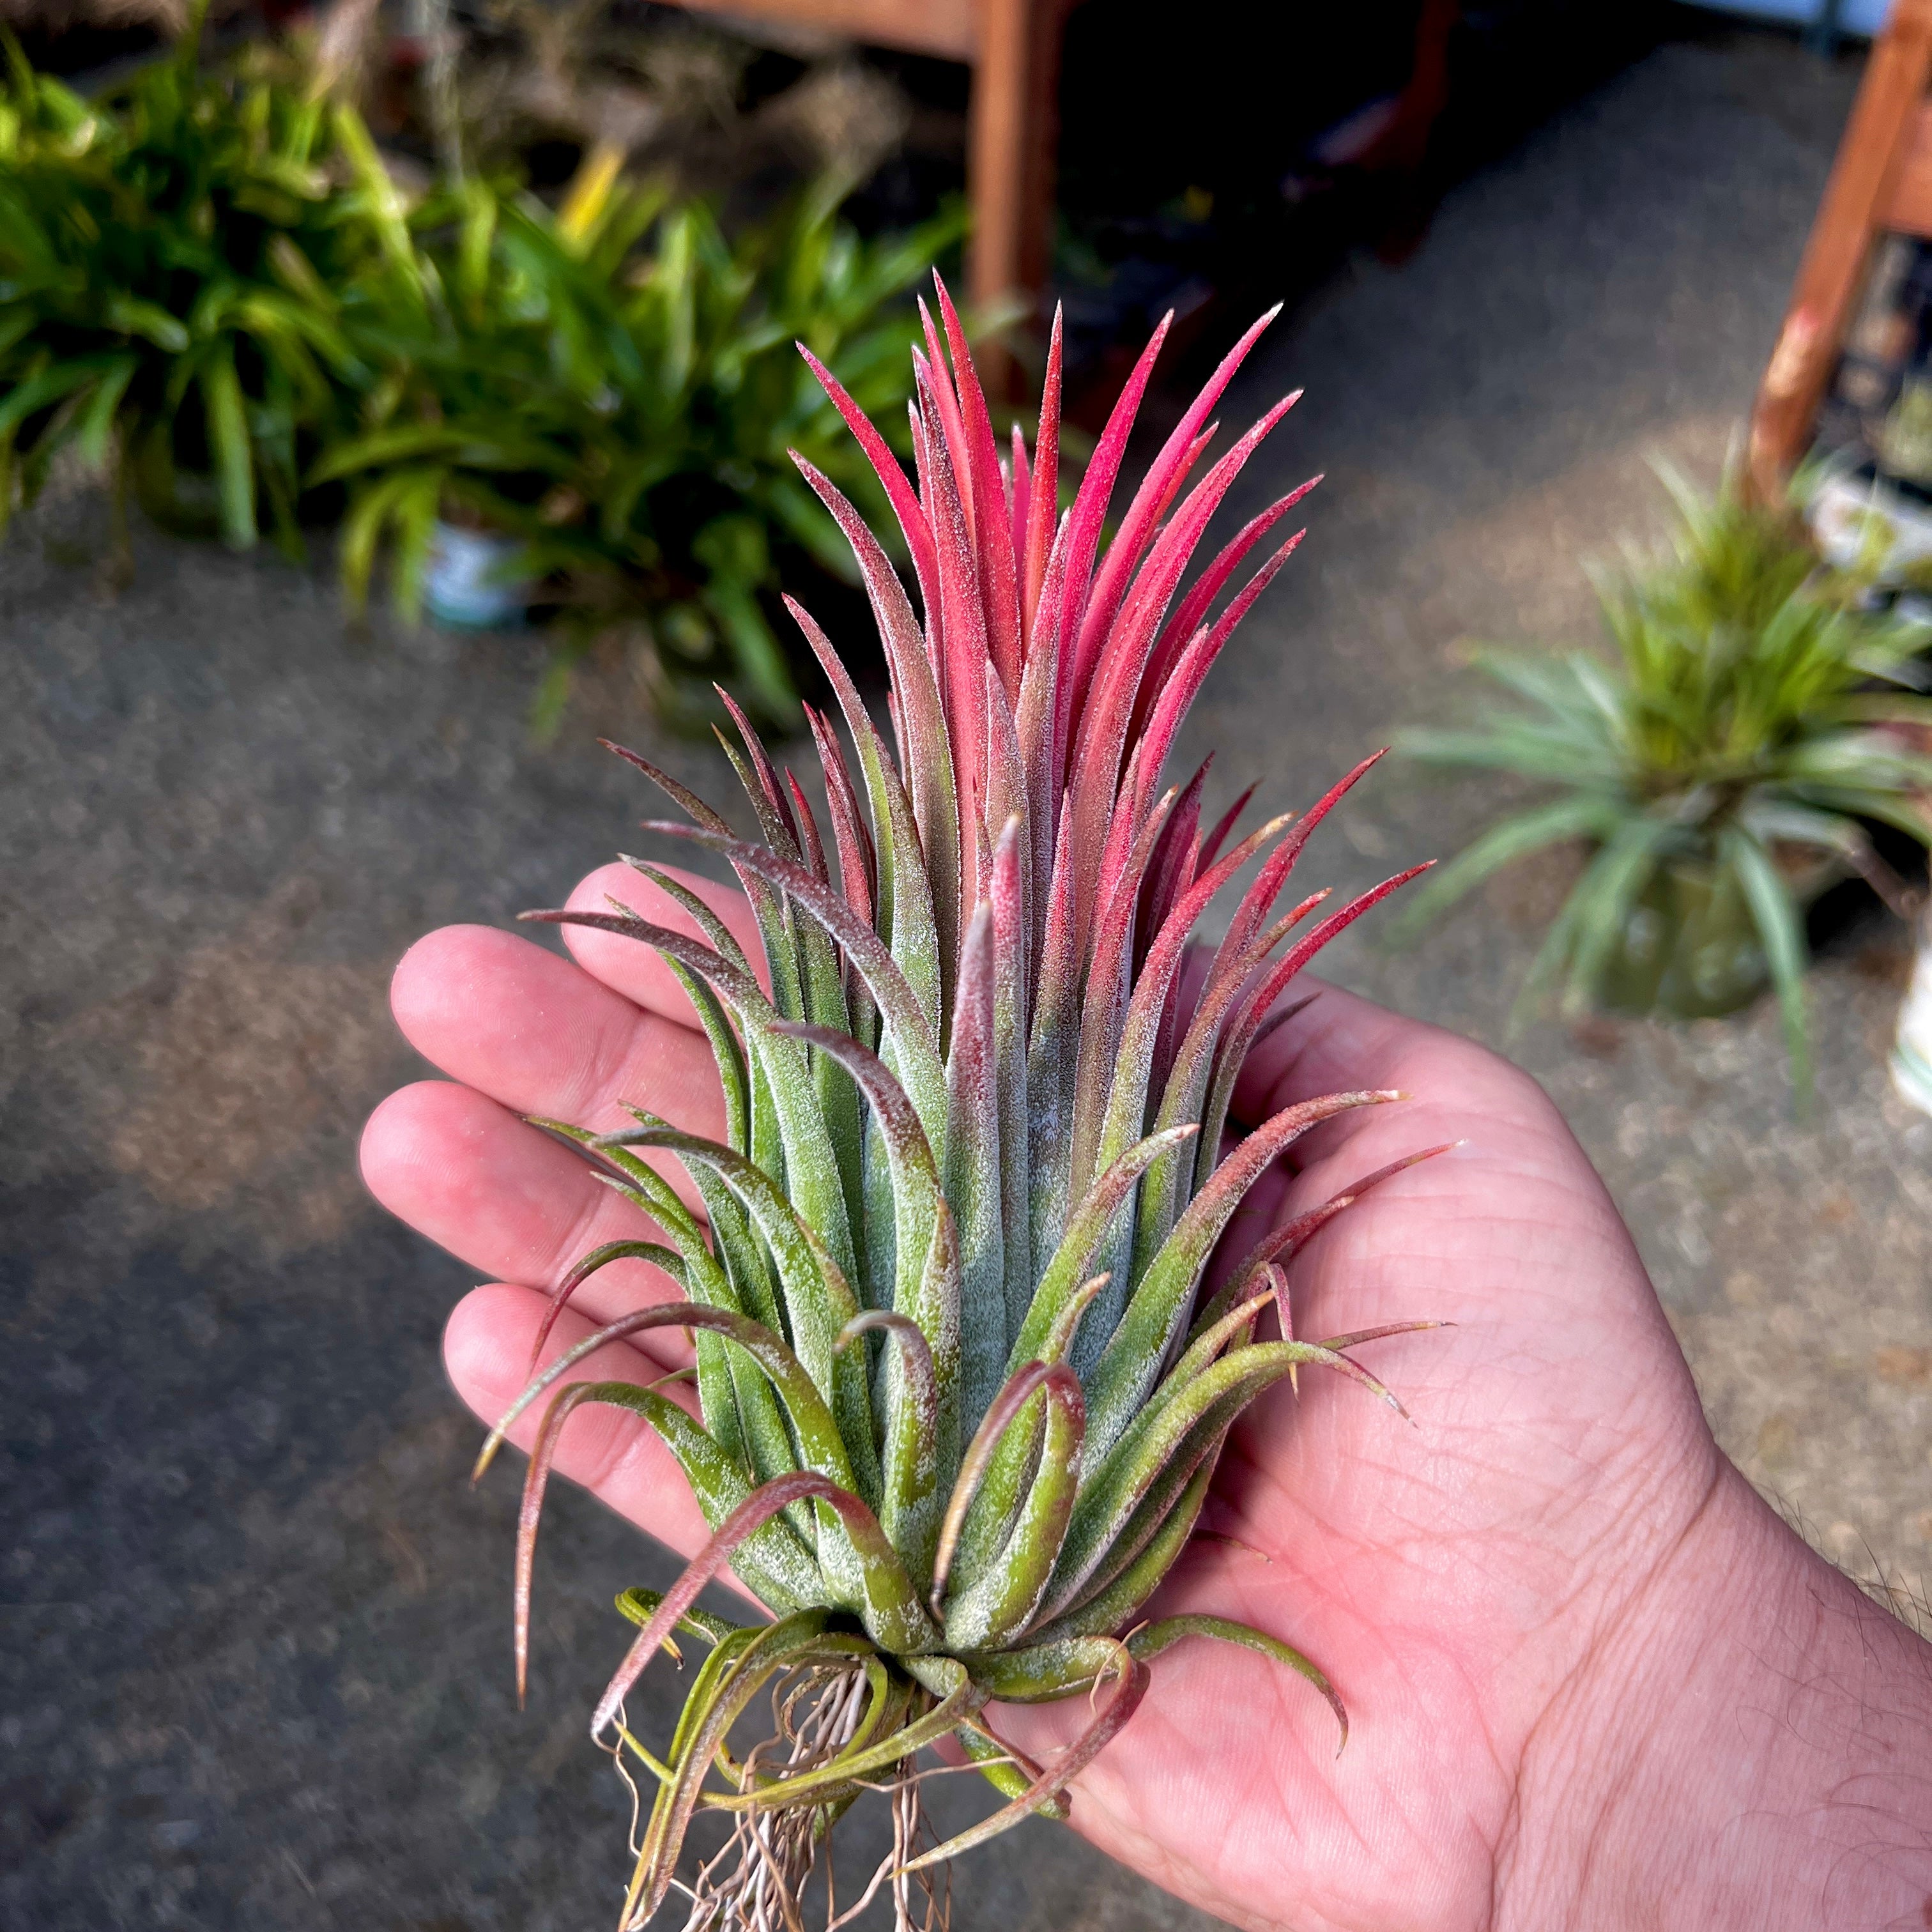 Ionantha Curly Giant XL Selections